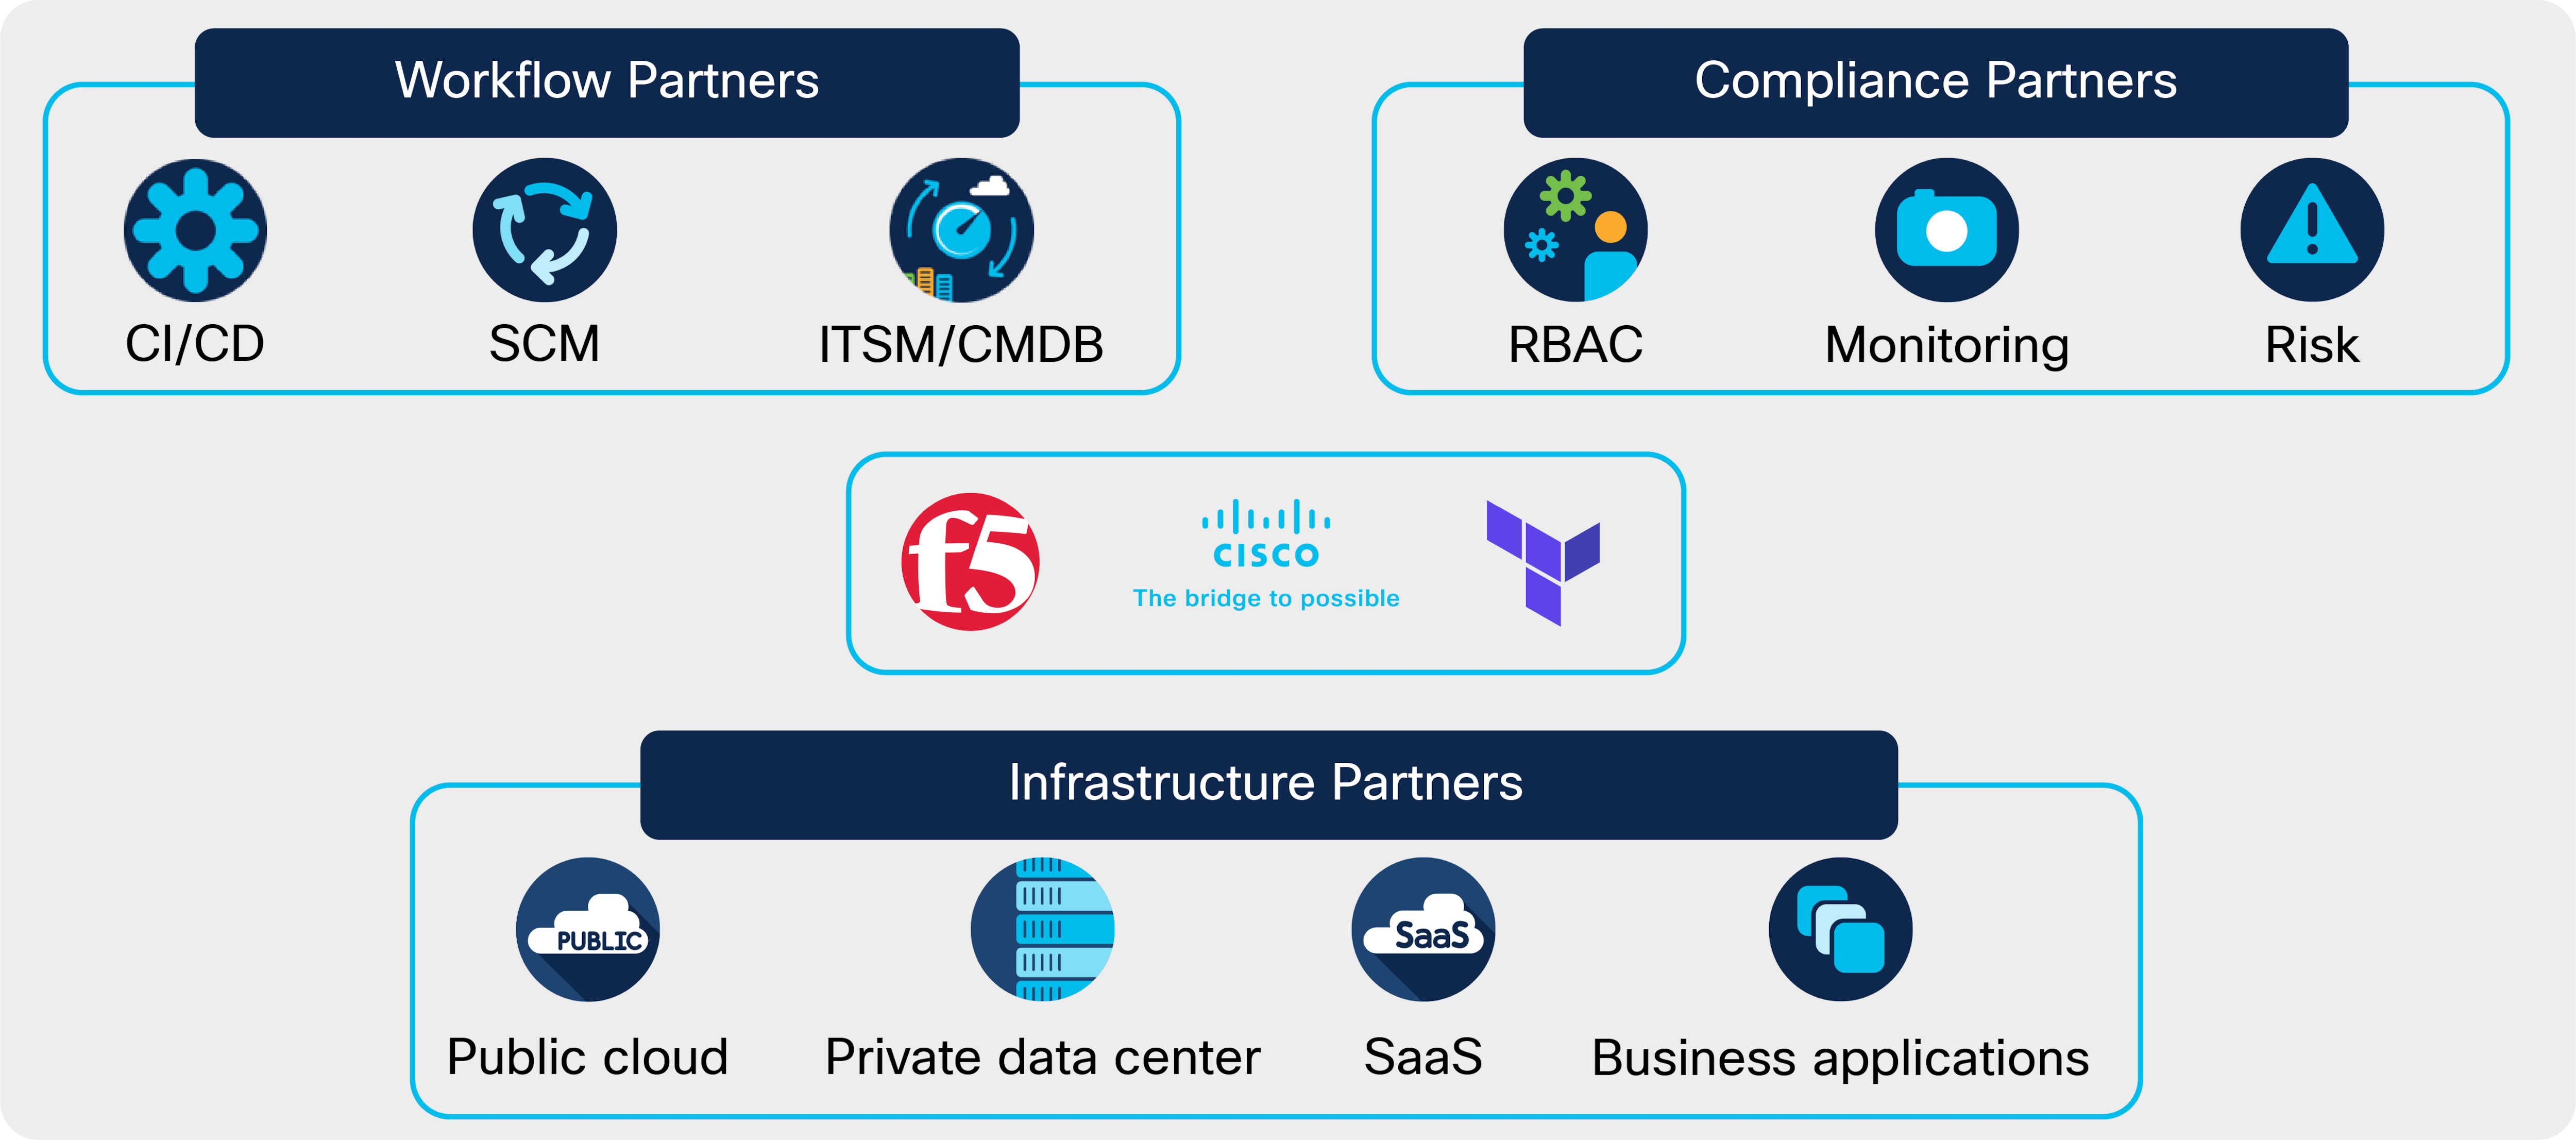 F5, Cisco, and HashiCorp Terraform for end-to-end application lifecycle management in Cisco ACI® deployments